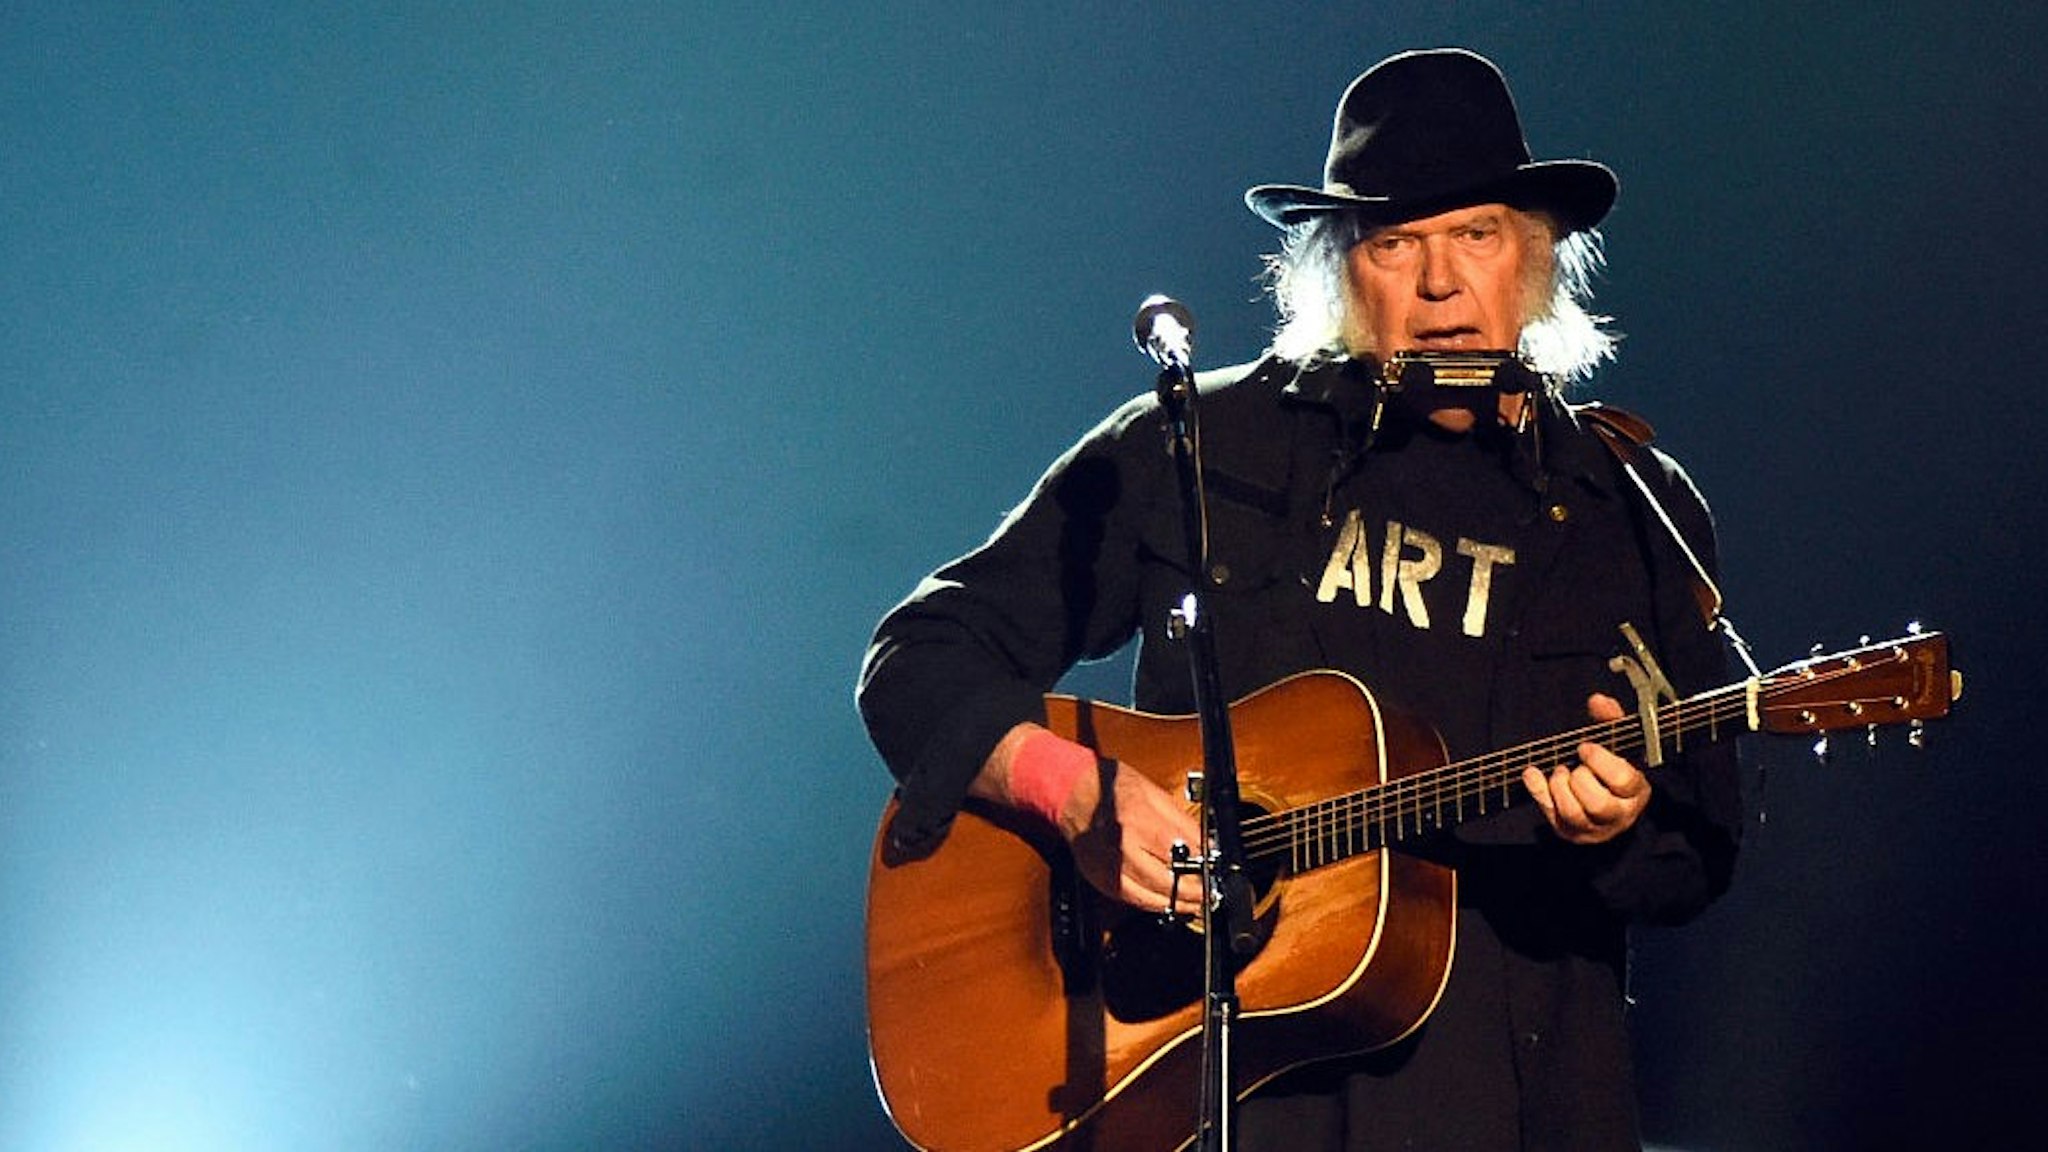 Singer Neil Young performs onstage at the 25th anniversary MusiCares 2015 Person Of The Year Gala honoring Bob Dylan at the Los Angeles Convention Center on February 6, 2015 in Los Angeles, California. The annual benefit raises critical funds for MusiCares' Emergency Financial Assistance and Addiction Recovery programs.